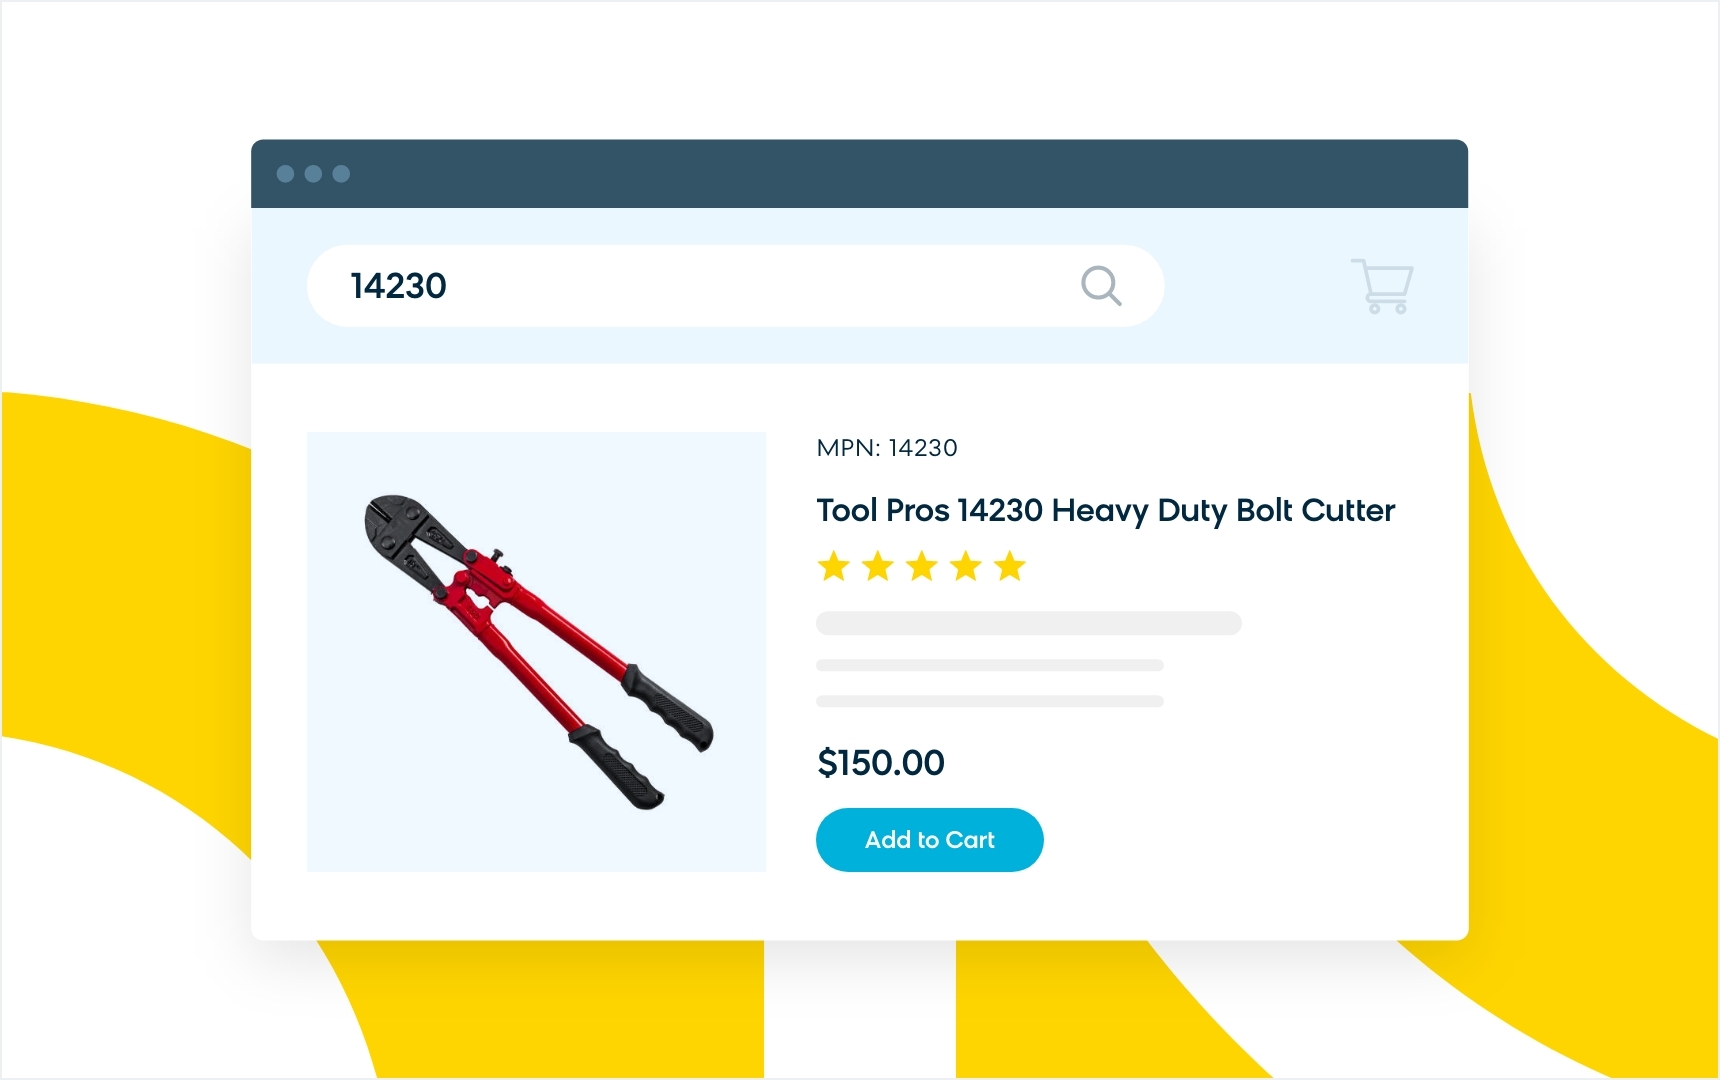 Searching for Bolt Cutter with a Product Number